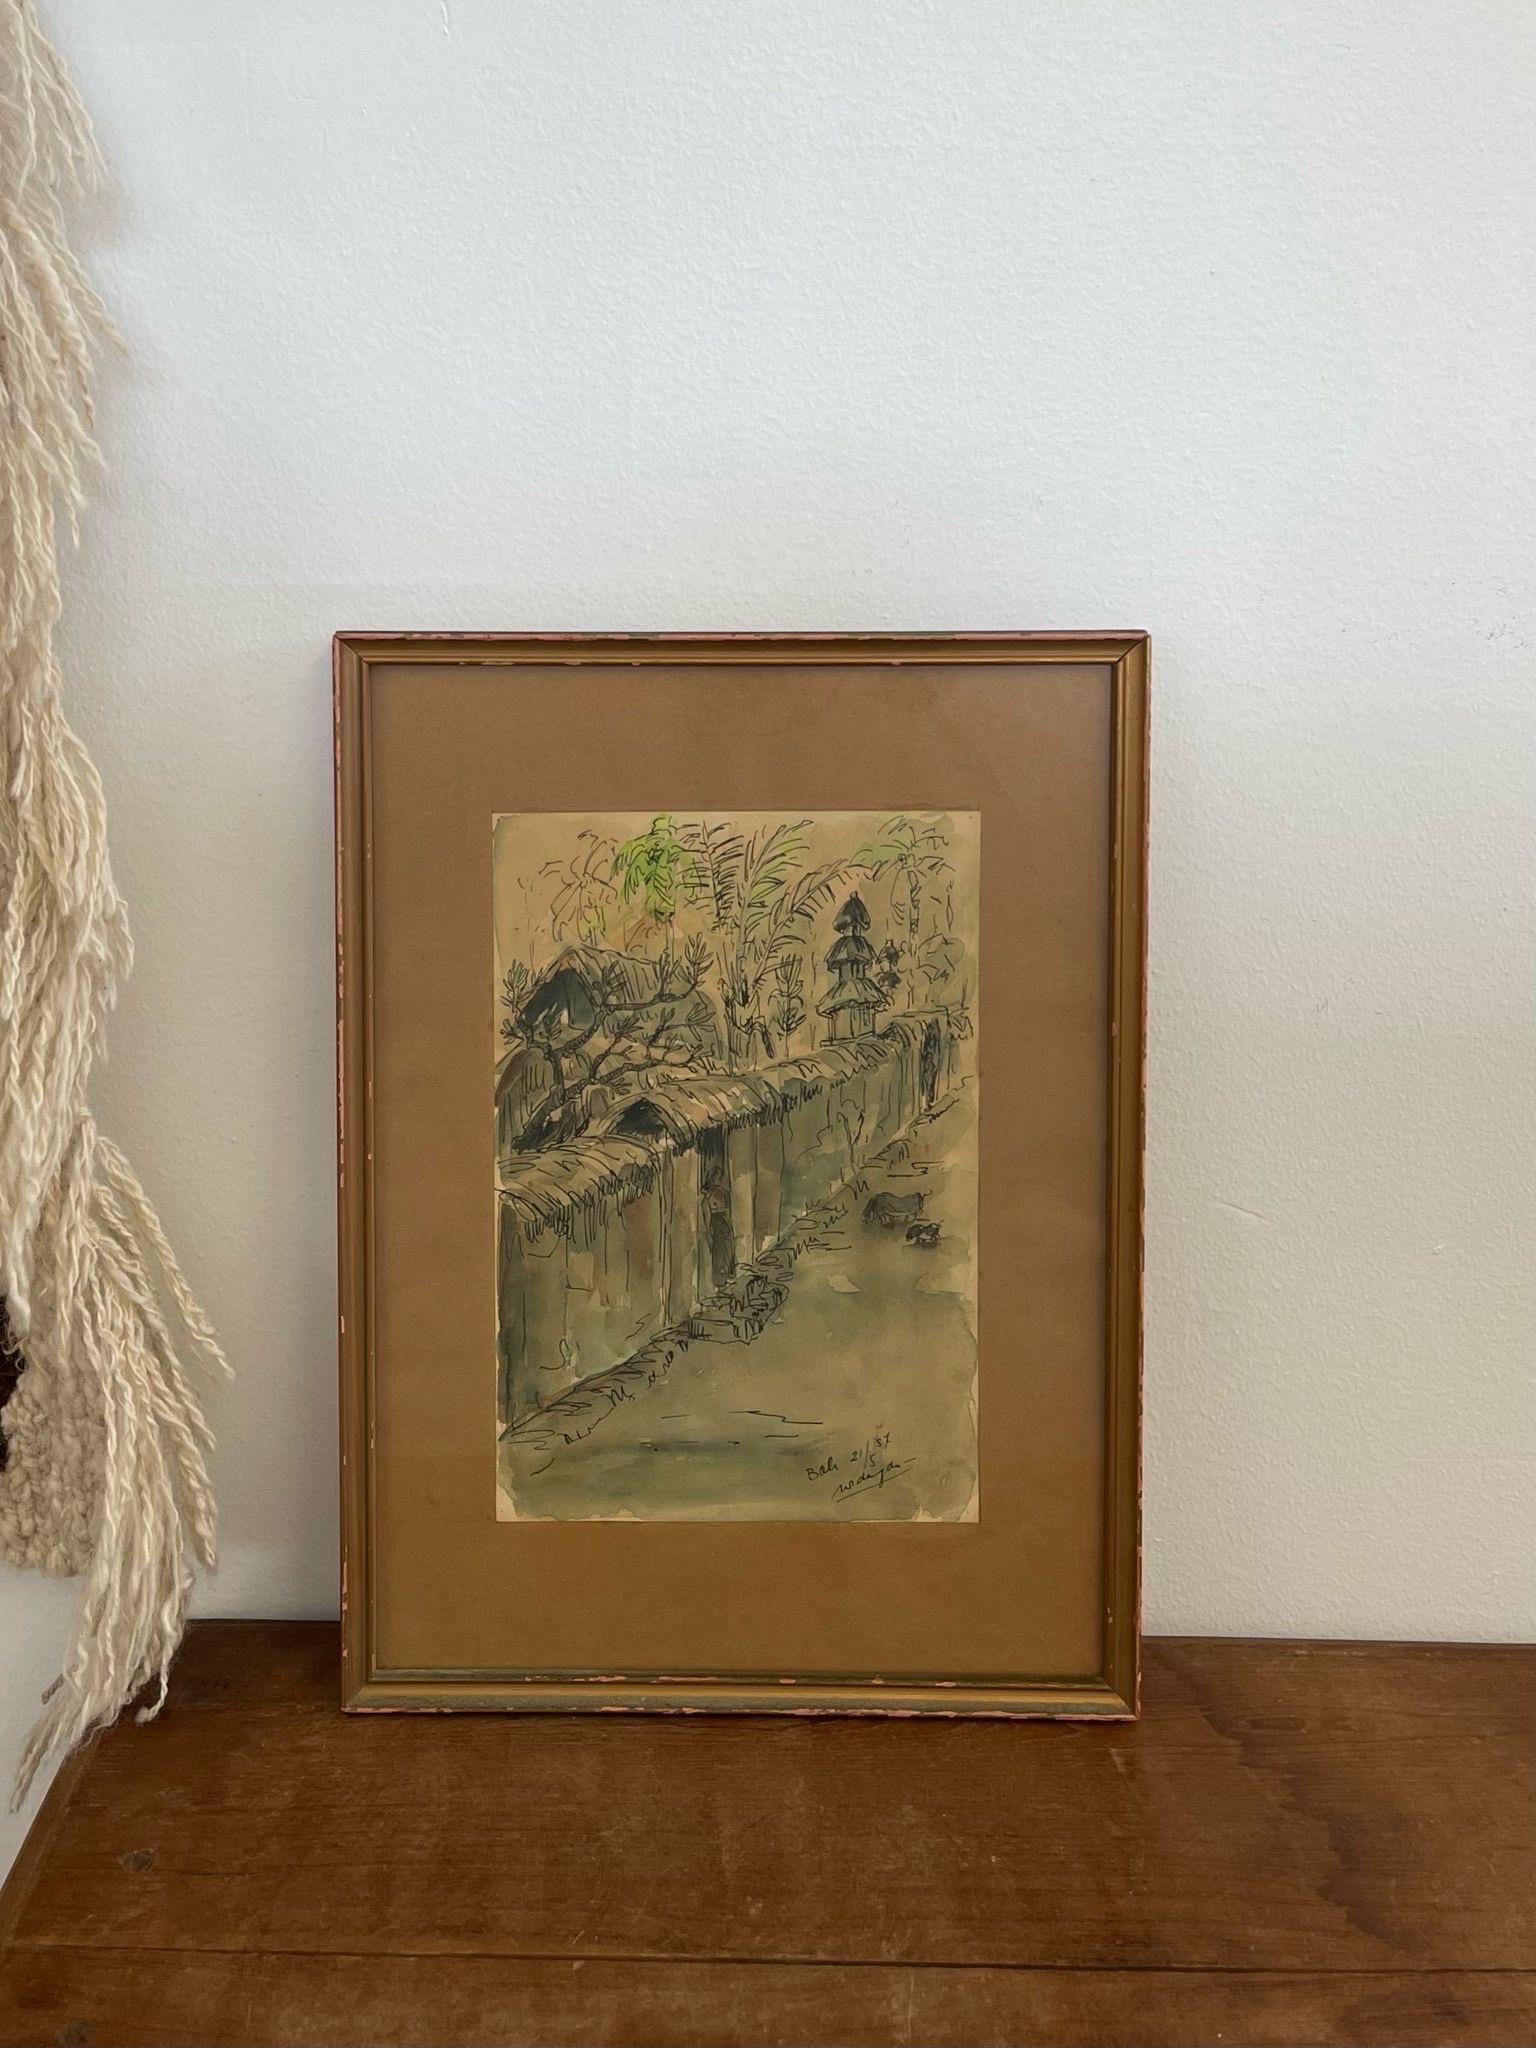 Signature on the lower corner of the painting shows that this Art was inspired by Bali. Possibly Watercolor or Pen on Paper. Professionally framed and matted. Vintage Condition Consistent with Age as Pictured.

Dimensions. 11 1/2 W ; 1/2 D ; 15 1/2 H